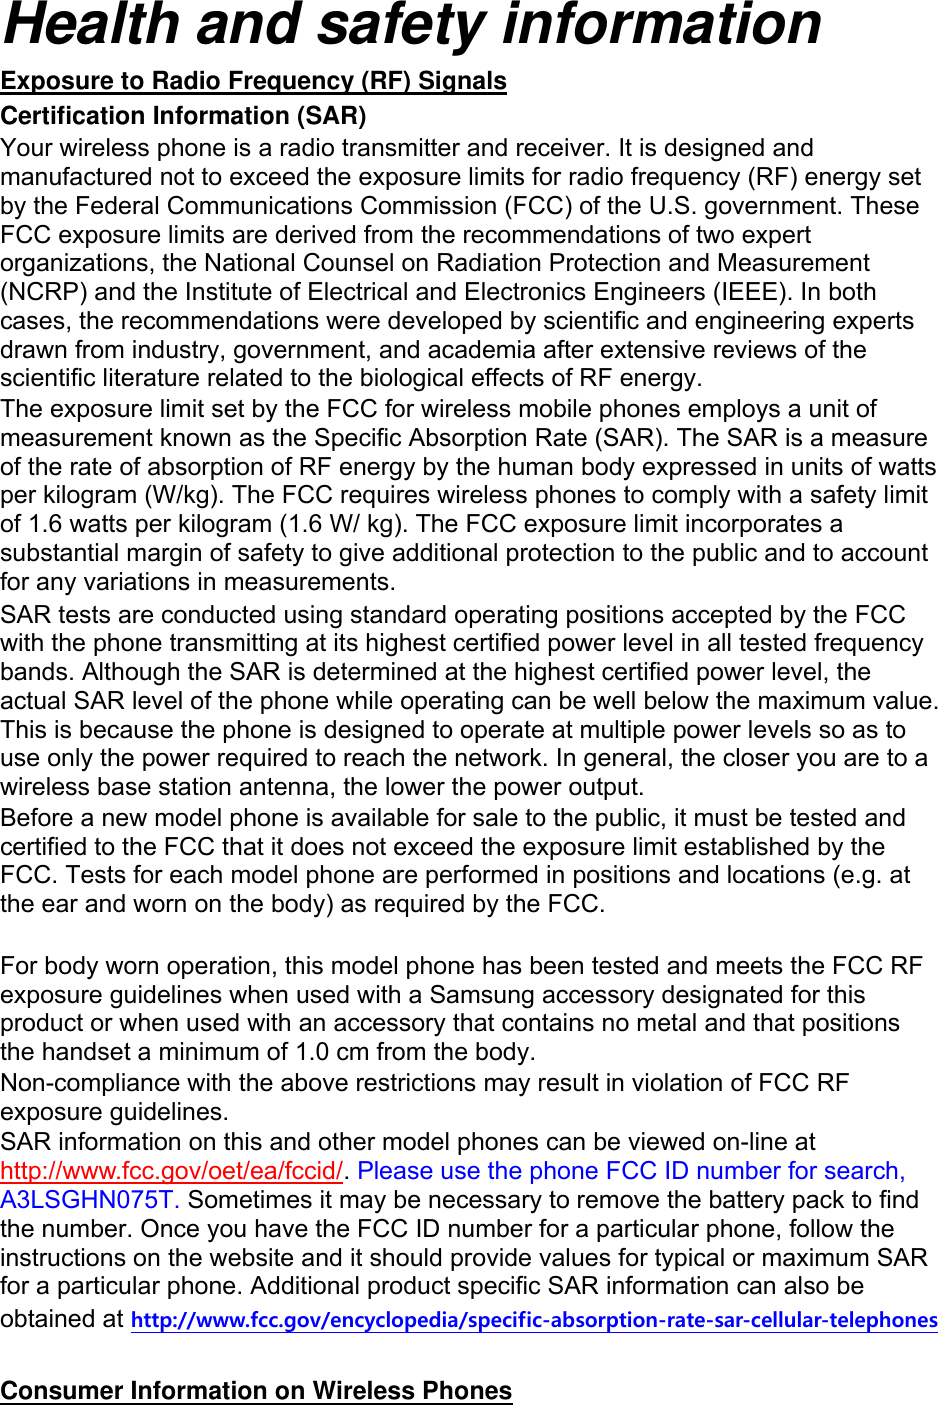 Health and safety information Exposure to Radio Frequency (RF) Signals Certification Information (SAR) Your wireless phone is a radio transmitter and receiver. It is designed and manufactured not to exceed the exposure limits for radio frequency (RF) energy set by the Federal Communications Commission (FCC) of the U.S. government. These FCC exposure limits are derived from the recommendations of two expert organizations, the National Counsel on Radiation Protection and Measurement (NCRP) and the Institute of Electrical and Electronics Engineers (IEEE). In both cases, the recommendations were developed by scientific and engineering experts drawn from industry, government, and academia after extensive reviews of the scientific literature related to the biological effects of RF energy. The exposure limit set by the FCC for wireless mobile phones employs a unit of measurement known as the Specific Absorption Rate (SAR). The SAR is a measure of the rate of absorption of RF energy by the human body expressed in units of watts per kilogram (W/kg). The FCC requires wireless phones to comply with a safety limit of 1.6 watts per kilogram (1.6 W/ kg). The FCC exposure limit incorporates a substantial margin of safety to give additional protection to the public and to account for any variations in measurements. SAR tests are conducted using standard operating positions accepted by the FCC with the phone transmitting at its highest certified power level in all tested frequency bands. Although the SAR is determined at the highest certified power level, the actual SAR level of the phone while operating can be well below the maximum value. This is because the phone is designed to operate at multiple power levels so as to use only the power required to reach the network. In general, the closer you are to a wireless base station antenna, the lower the power output. Before a new model phone is available for sale to the public, it must be tested and certified to the FCC that it does not exceed the exposure limit established by the FCC. Tests for each model phone are performed in positions and locations (e.g. at the ear and worn on the body) as required by the FCC.      For body worn operation, this model phone has been tested and meets the FCC RF exposure guidelines when used with a Samsung accessory designated for this product or when used with an accessory that contains no metal and that positions the handset a minimum of 1.0 cm from the body.   Non-compliance with the above restrictions may result in violation of FCC RF exposure guidelines. SAR information on this and other model phones can be viewed on-line at http://www.fcc.gov/oet/ea/fccid/. Please use the phone FCC ID number for search, A3LSGHN075T. Sometimes it may be necessary to remove the battery pack to find the number. Once you have the FCC ID number for a particular phone, follow the instructions on the website and it should provide values for typical or maximum SAR for a particular phone. Additional product specific SAR information can also be obtained at http://www.fcc.gov/encyclopedia/specific-absorption-rate-sar-cellular-telephones  Consumer Information on Wireless Phones 